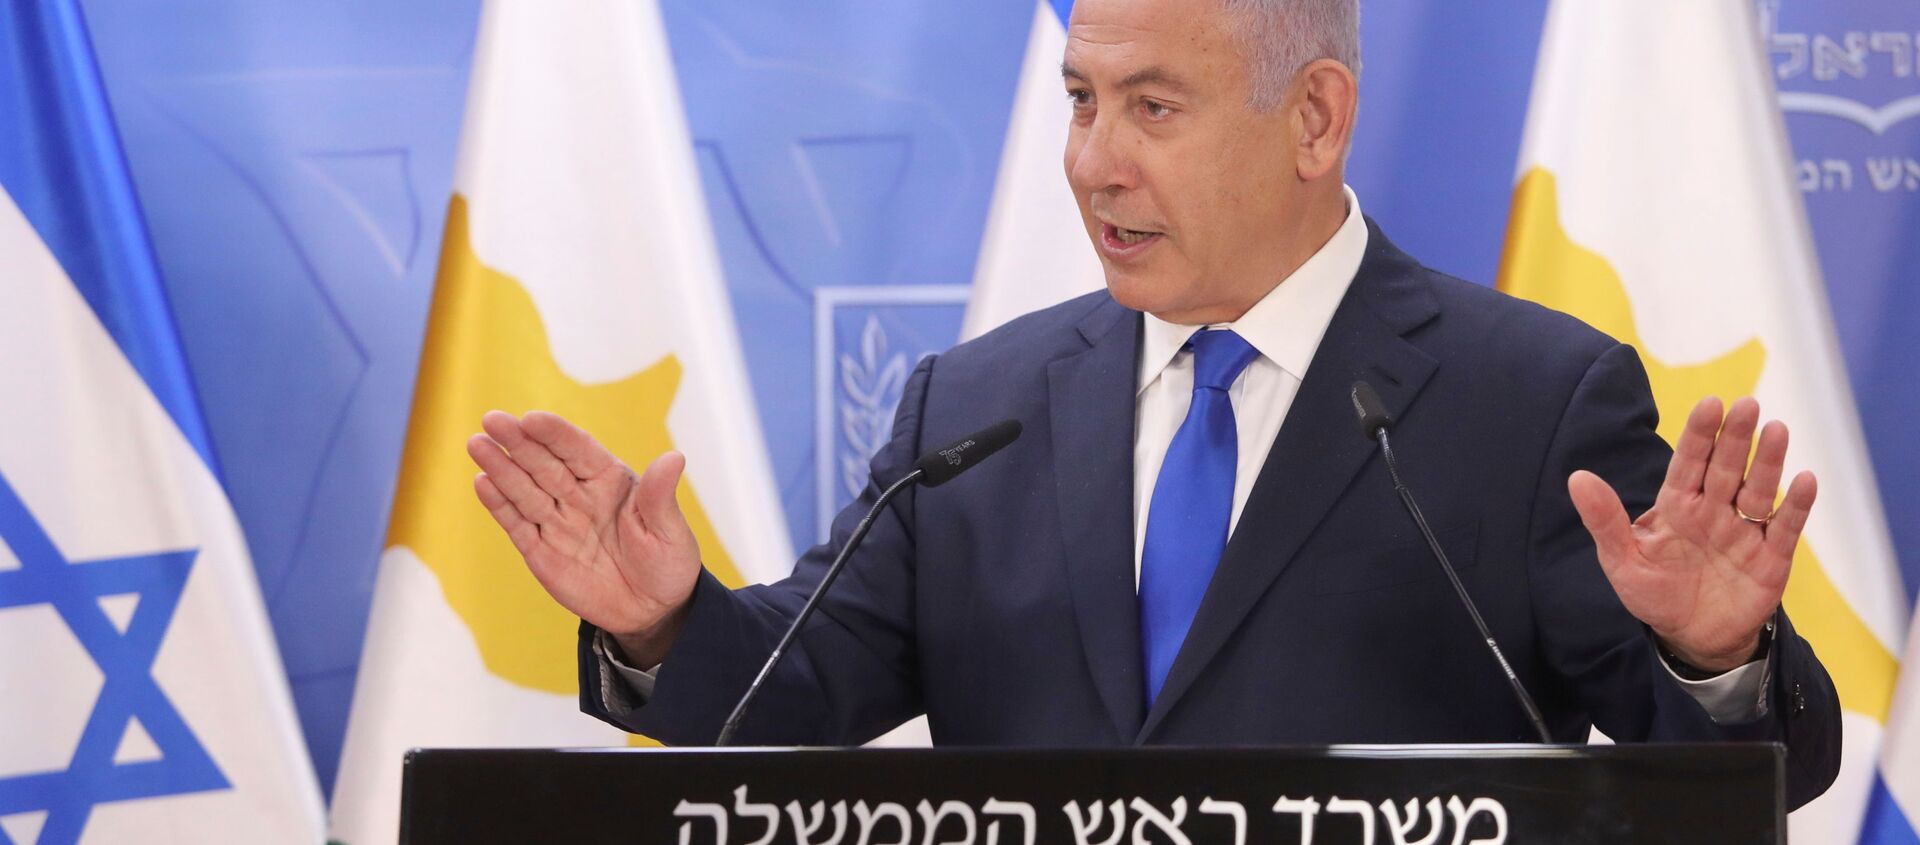 Israeli Prime Minister Benjamin Netanyahu delivers a joint statements with Cypriot President Nicos Anastasiades (not pictured) in Jerusalem February 14, 2021. - Sputnik International, 1920, 16.02.2021